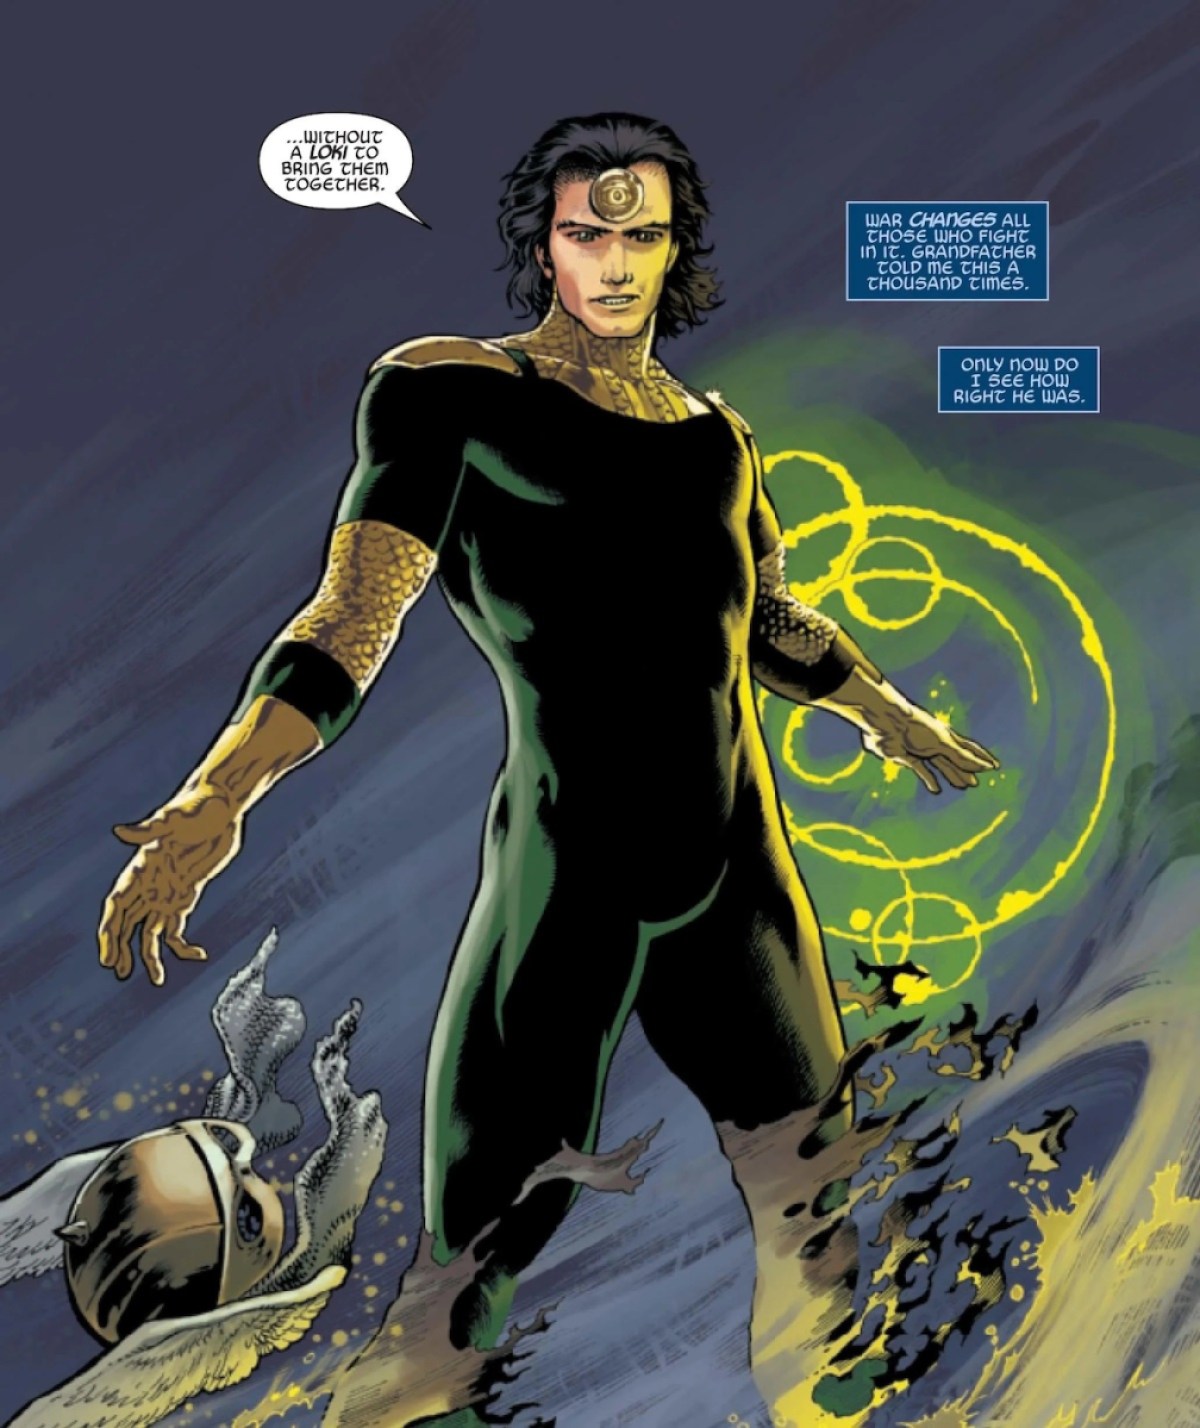 Loki as Avenger Prime, wearing a dark green bodysuit, says "...Without a Loki to bring them together."